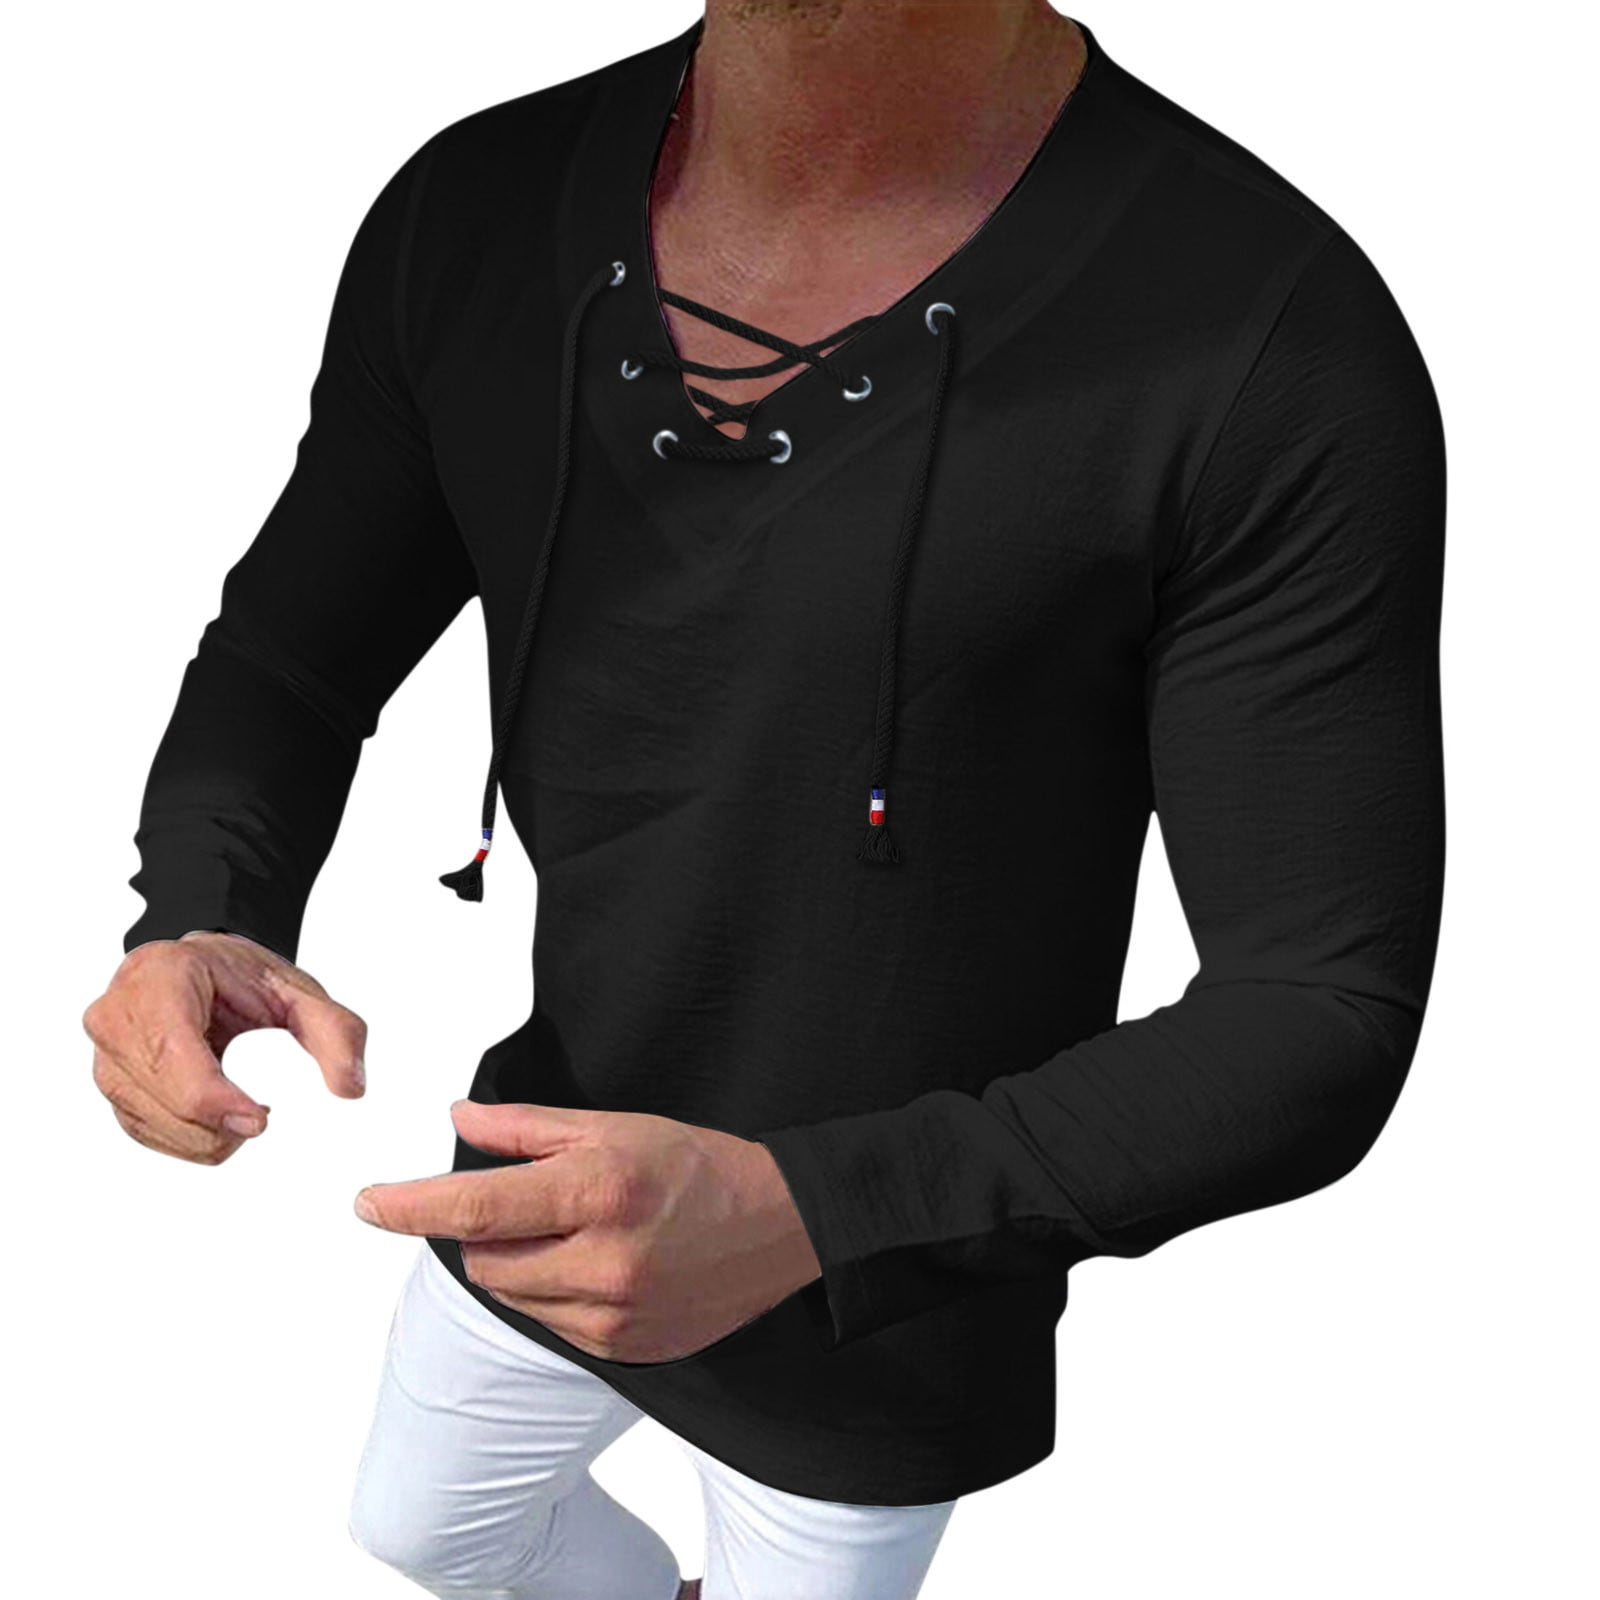 grey t-shirts male solid cotton linen v neck long sleeve blouse tops t shirt